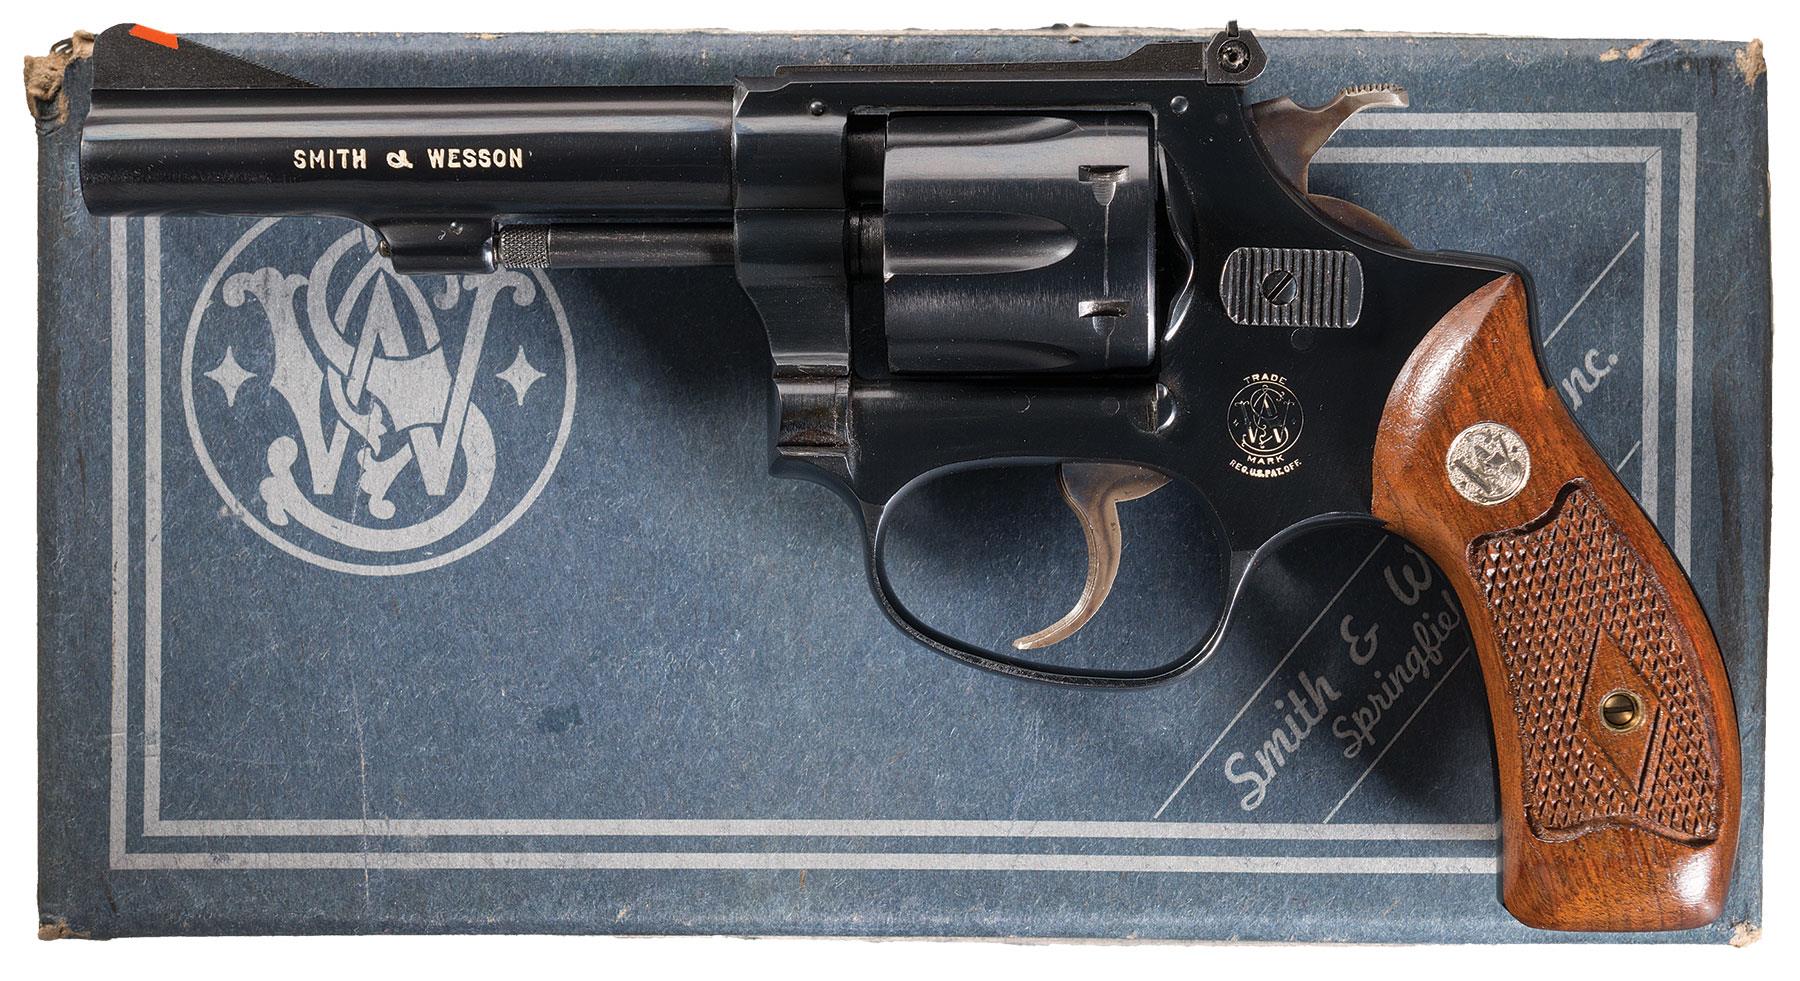 smith and wesson 22 revolver pistol serial number lookup